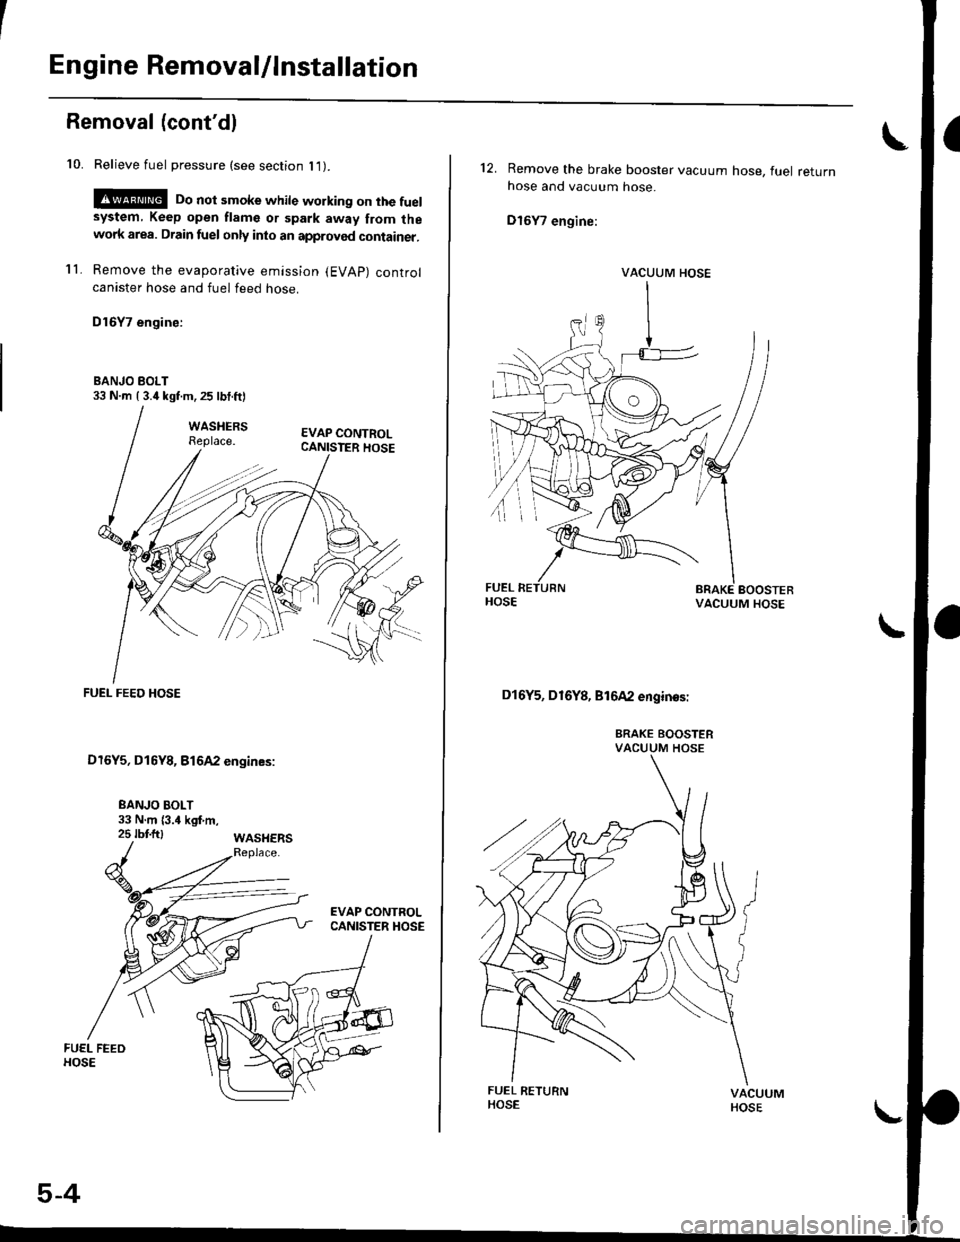 HONDA CIVIC 1999 6.G Workshop Manual Engine Removal/lnstallation
Removal (contdl
10. Relieve fuel pressure (see section l1).
!@ Do not smoke while working on the fuelsystem, Keep open flame or spark away from thewolk area. Drain fuel on